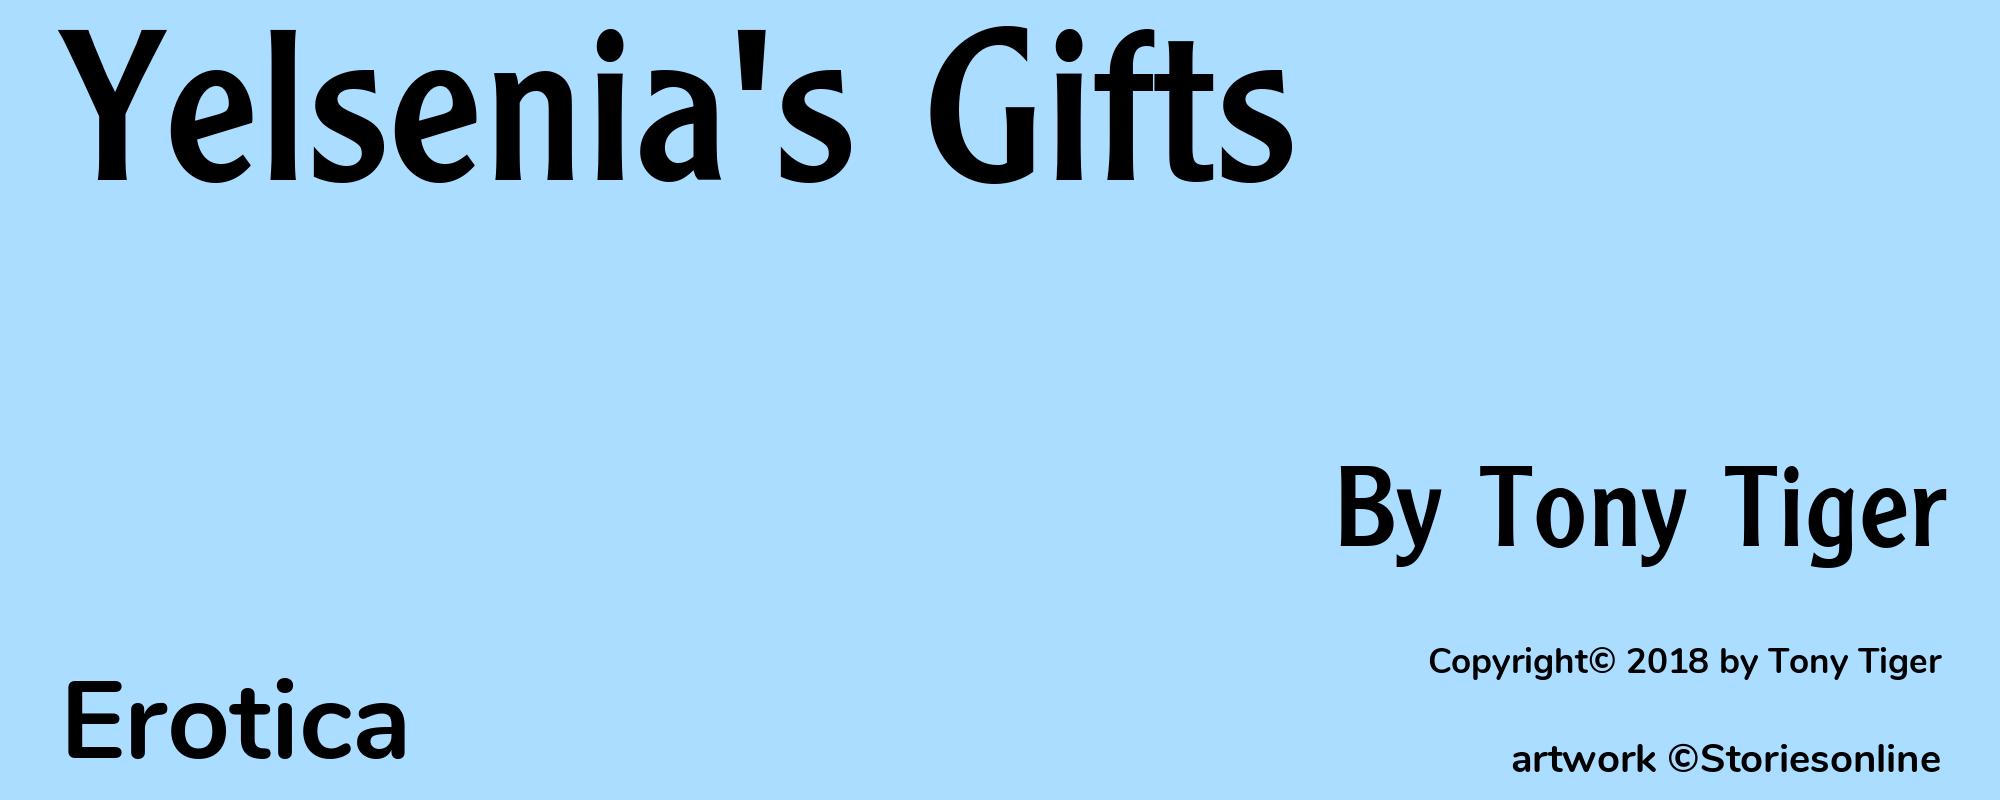 Yelsenia's Gifts - Cover